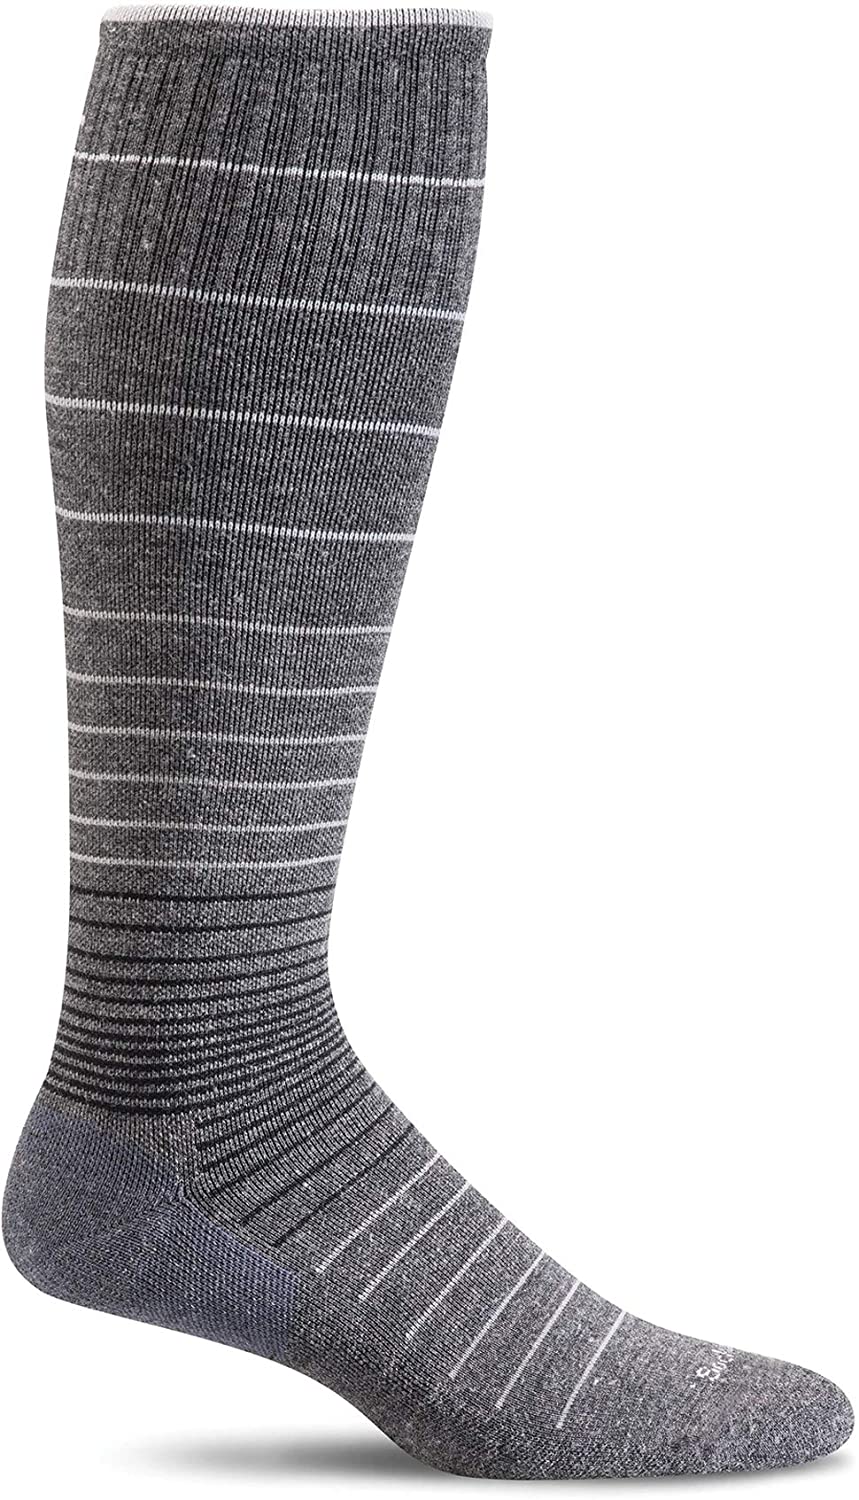 Sockwell Women's Circulator Moderate Graduated Compression Sock in Charcoal from the side